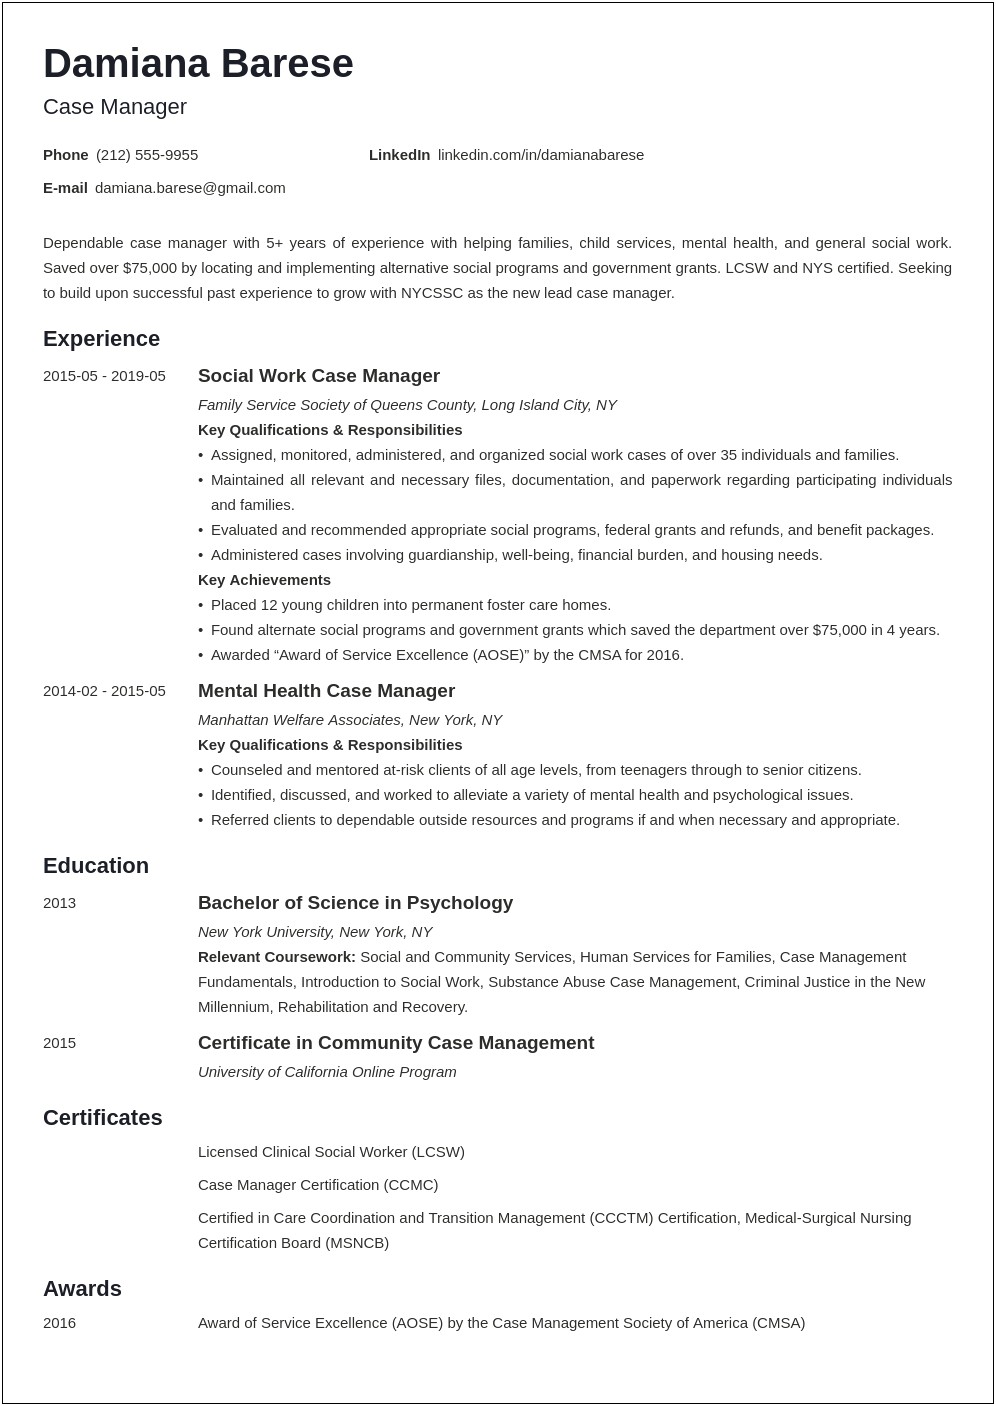 Objective For Family Service Worker For Employment Resume